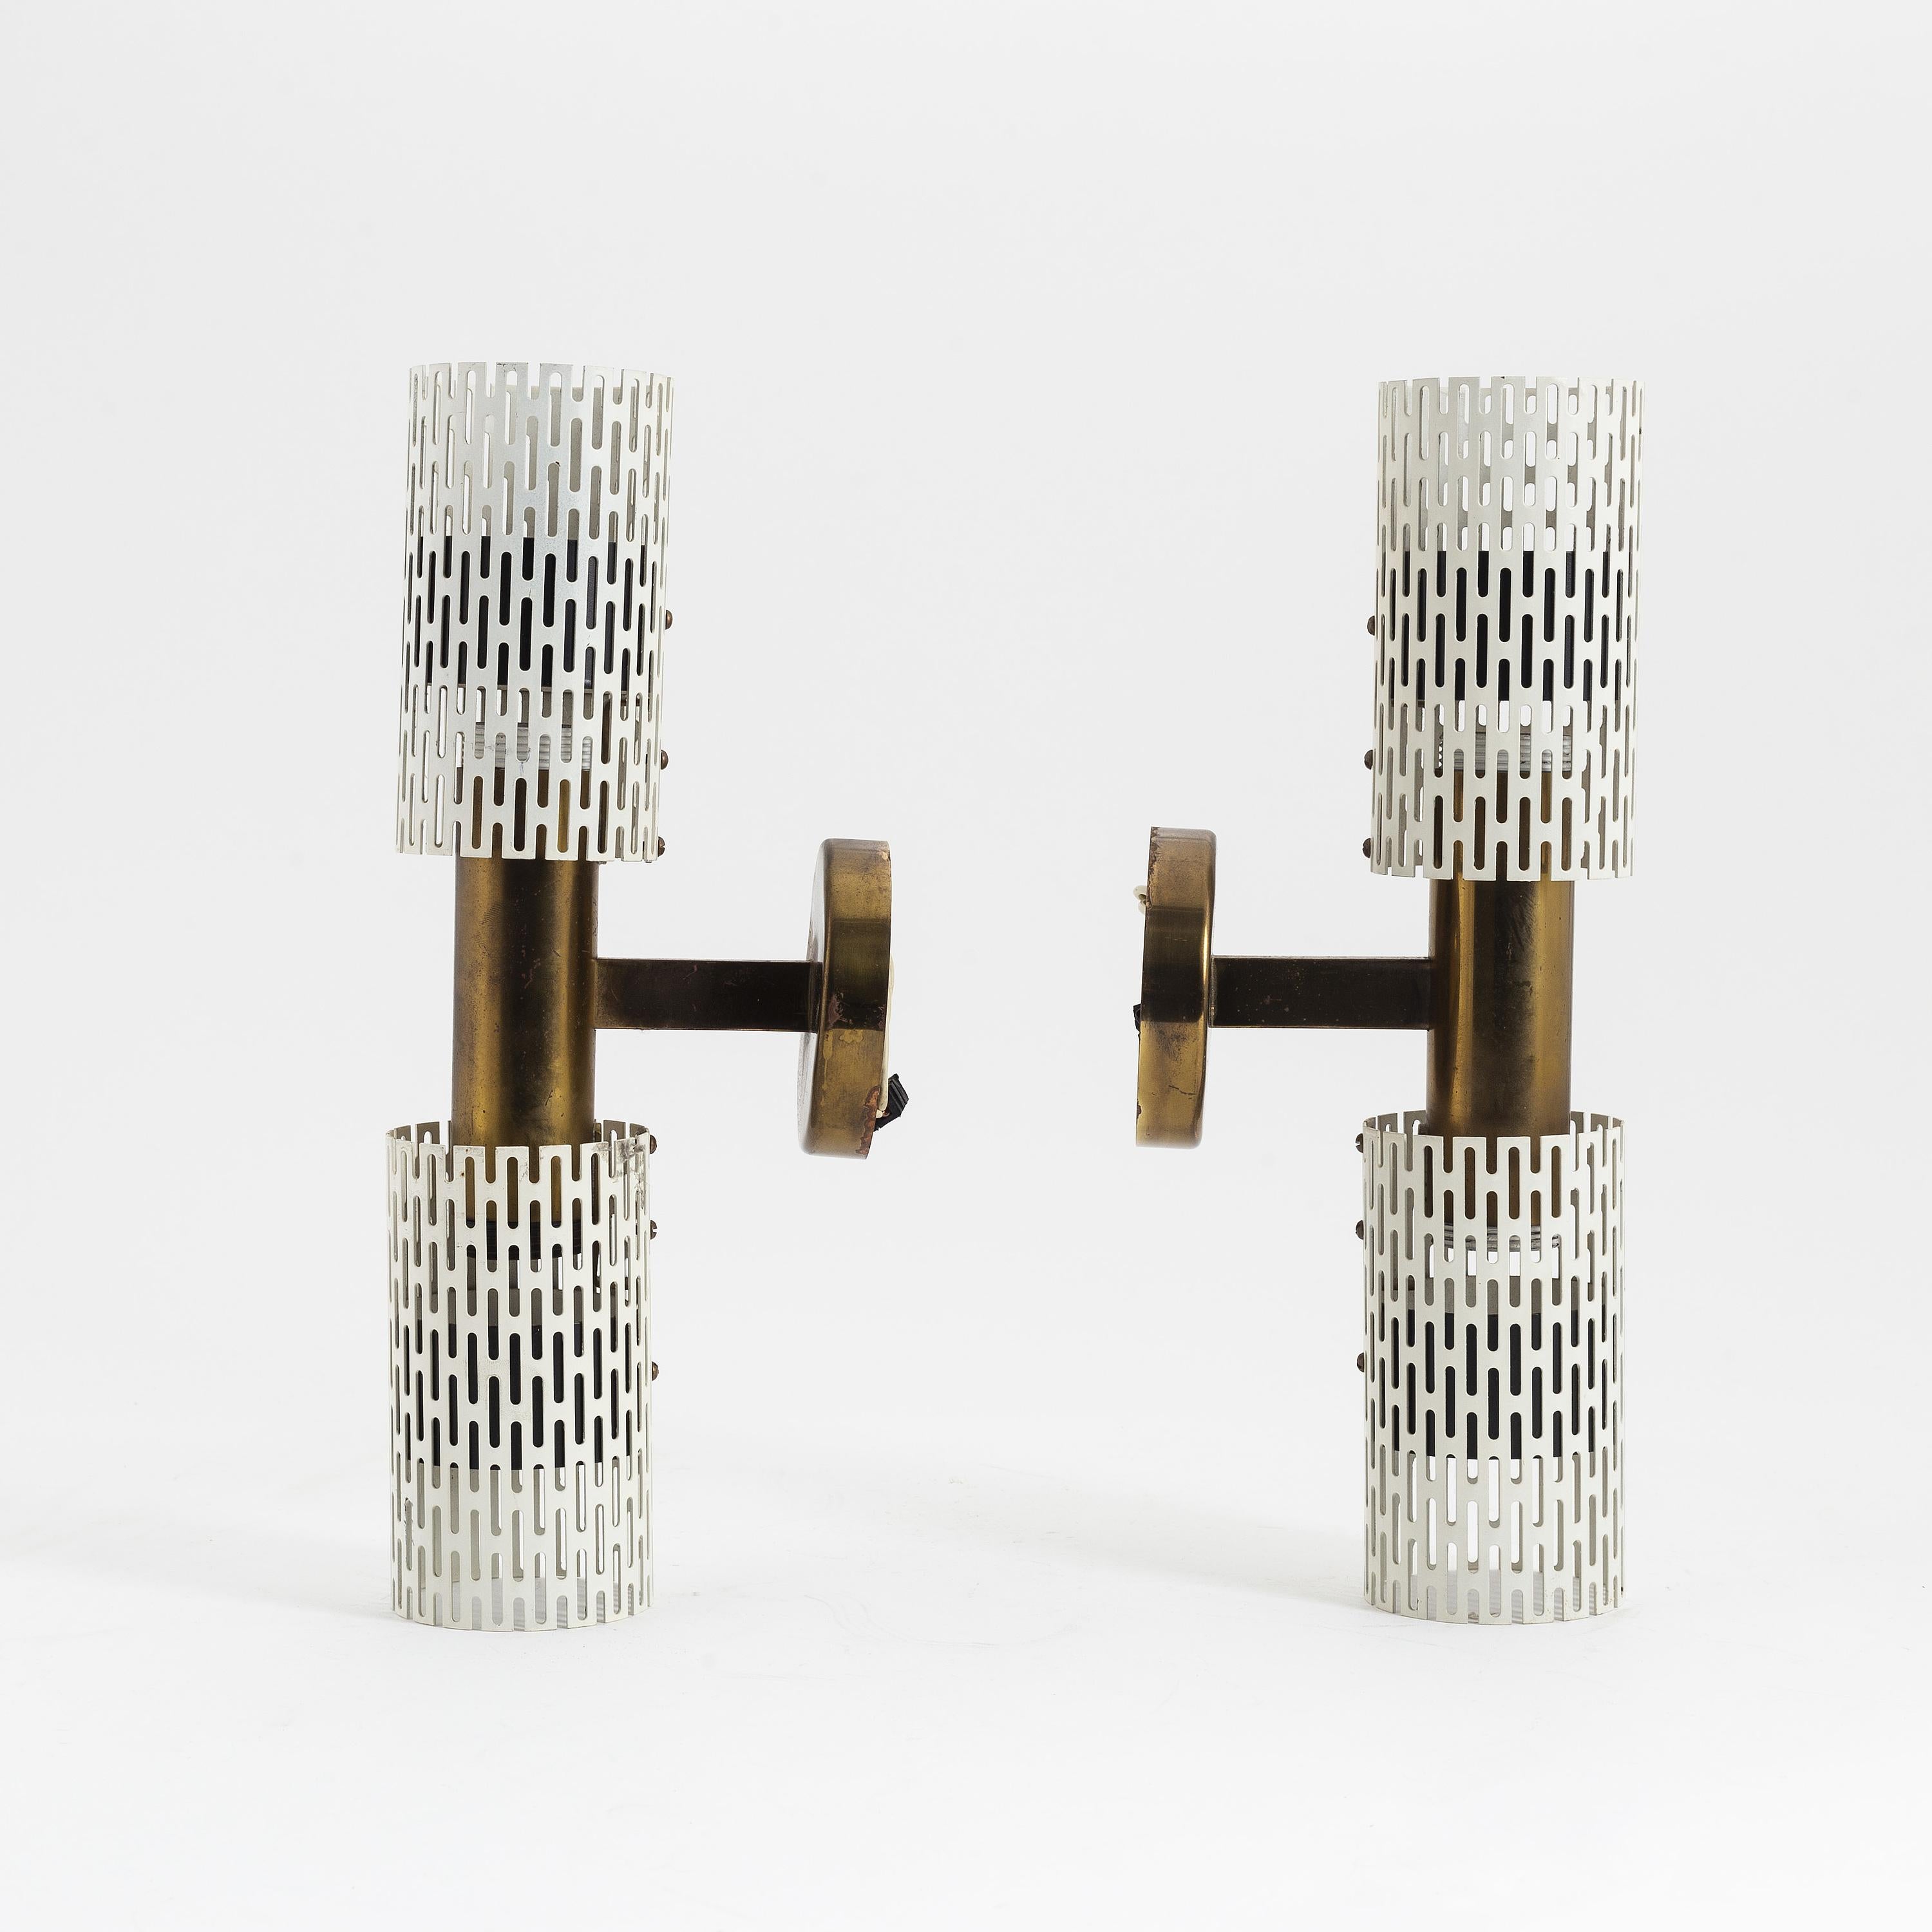 Harald Notini rare pair of sconces Model 11262 for Bohlmarks 1950.
This rare model by Swedish designer and sculptor, Harald Notini. He was the artistic leader at Böhlmarks and is represented at the ‘Nationalmuseum’ in Stockholm.

Between the